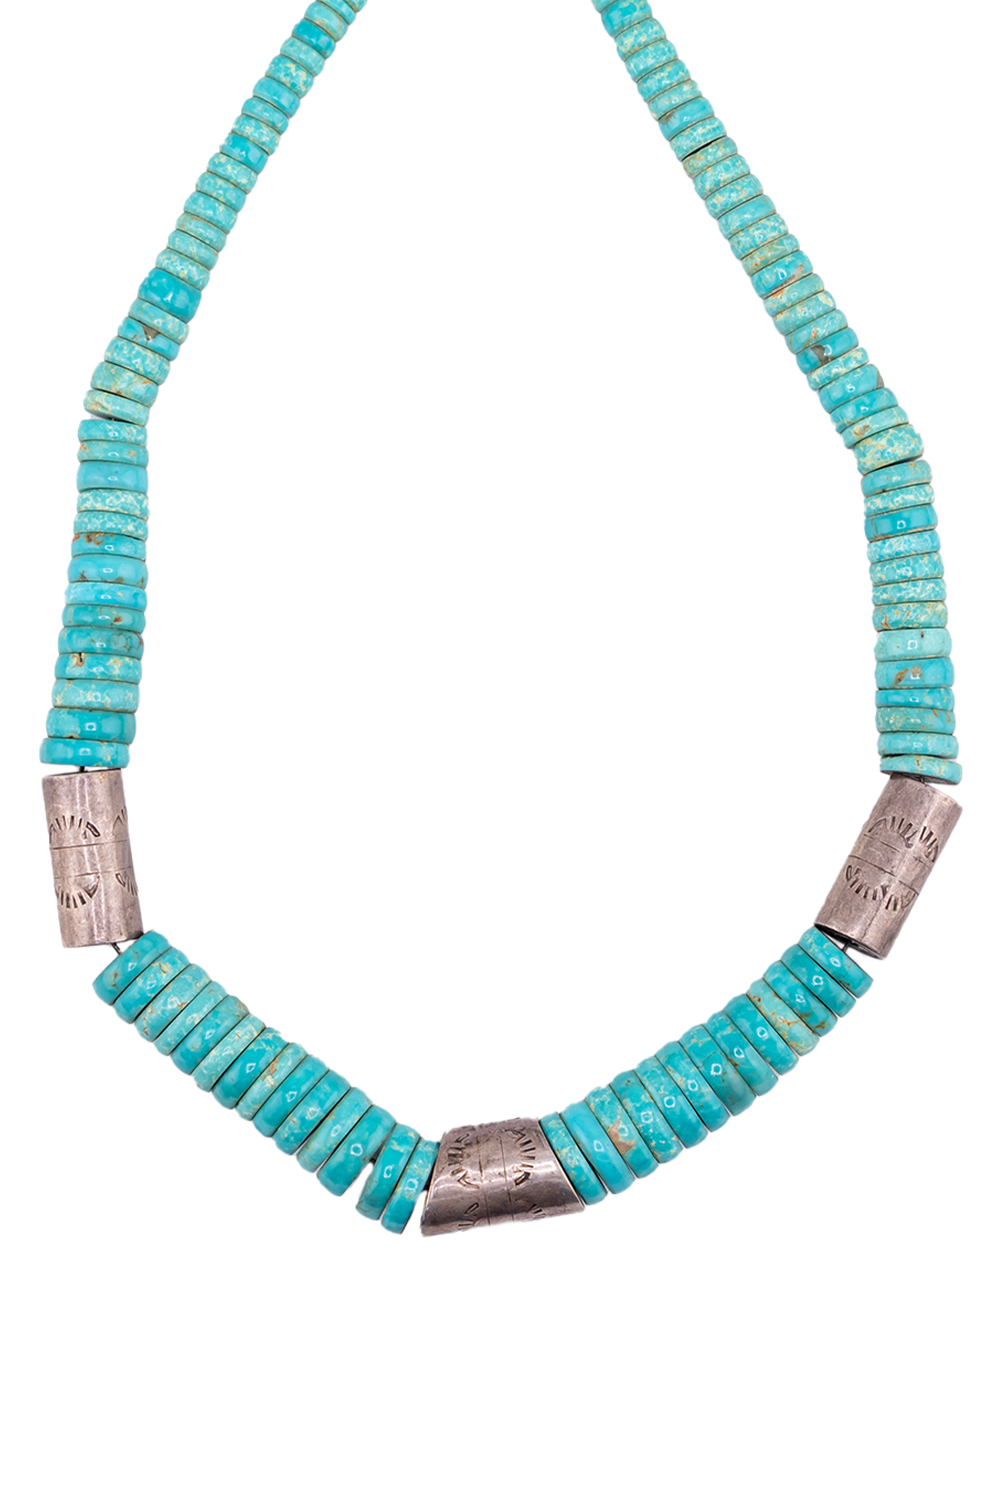 Old Rolled Turquoise Necklace Sterling Stamped Beads